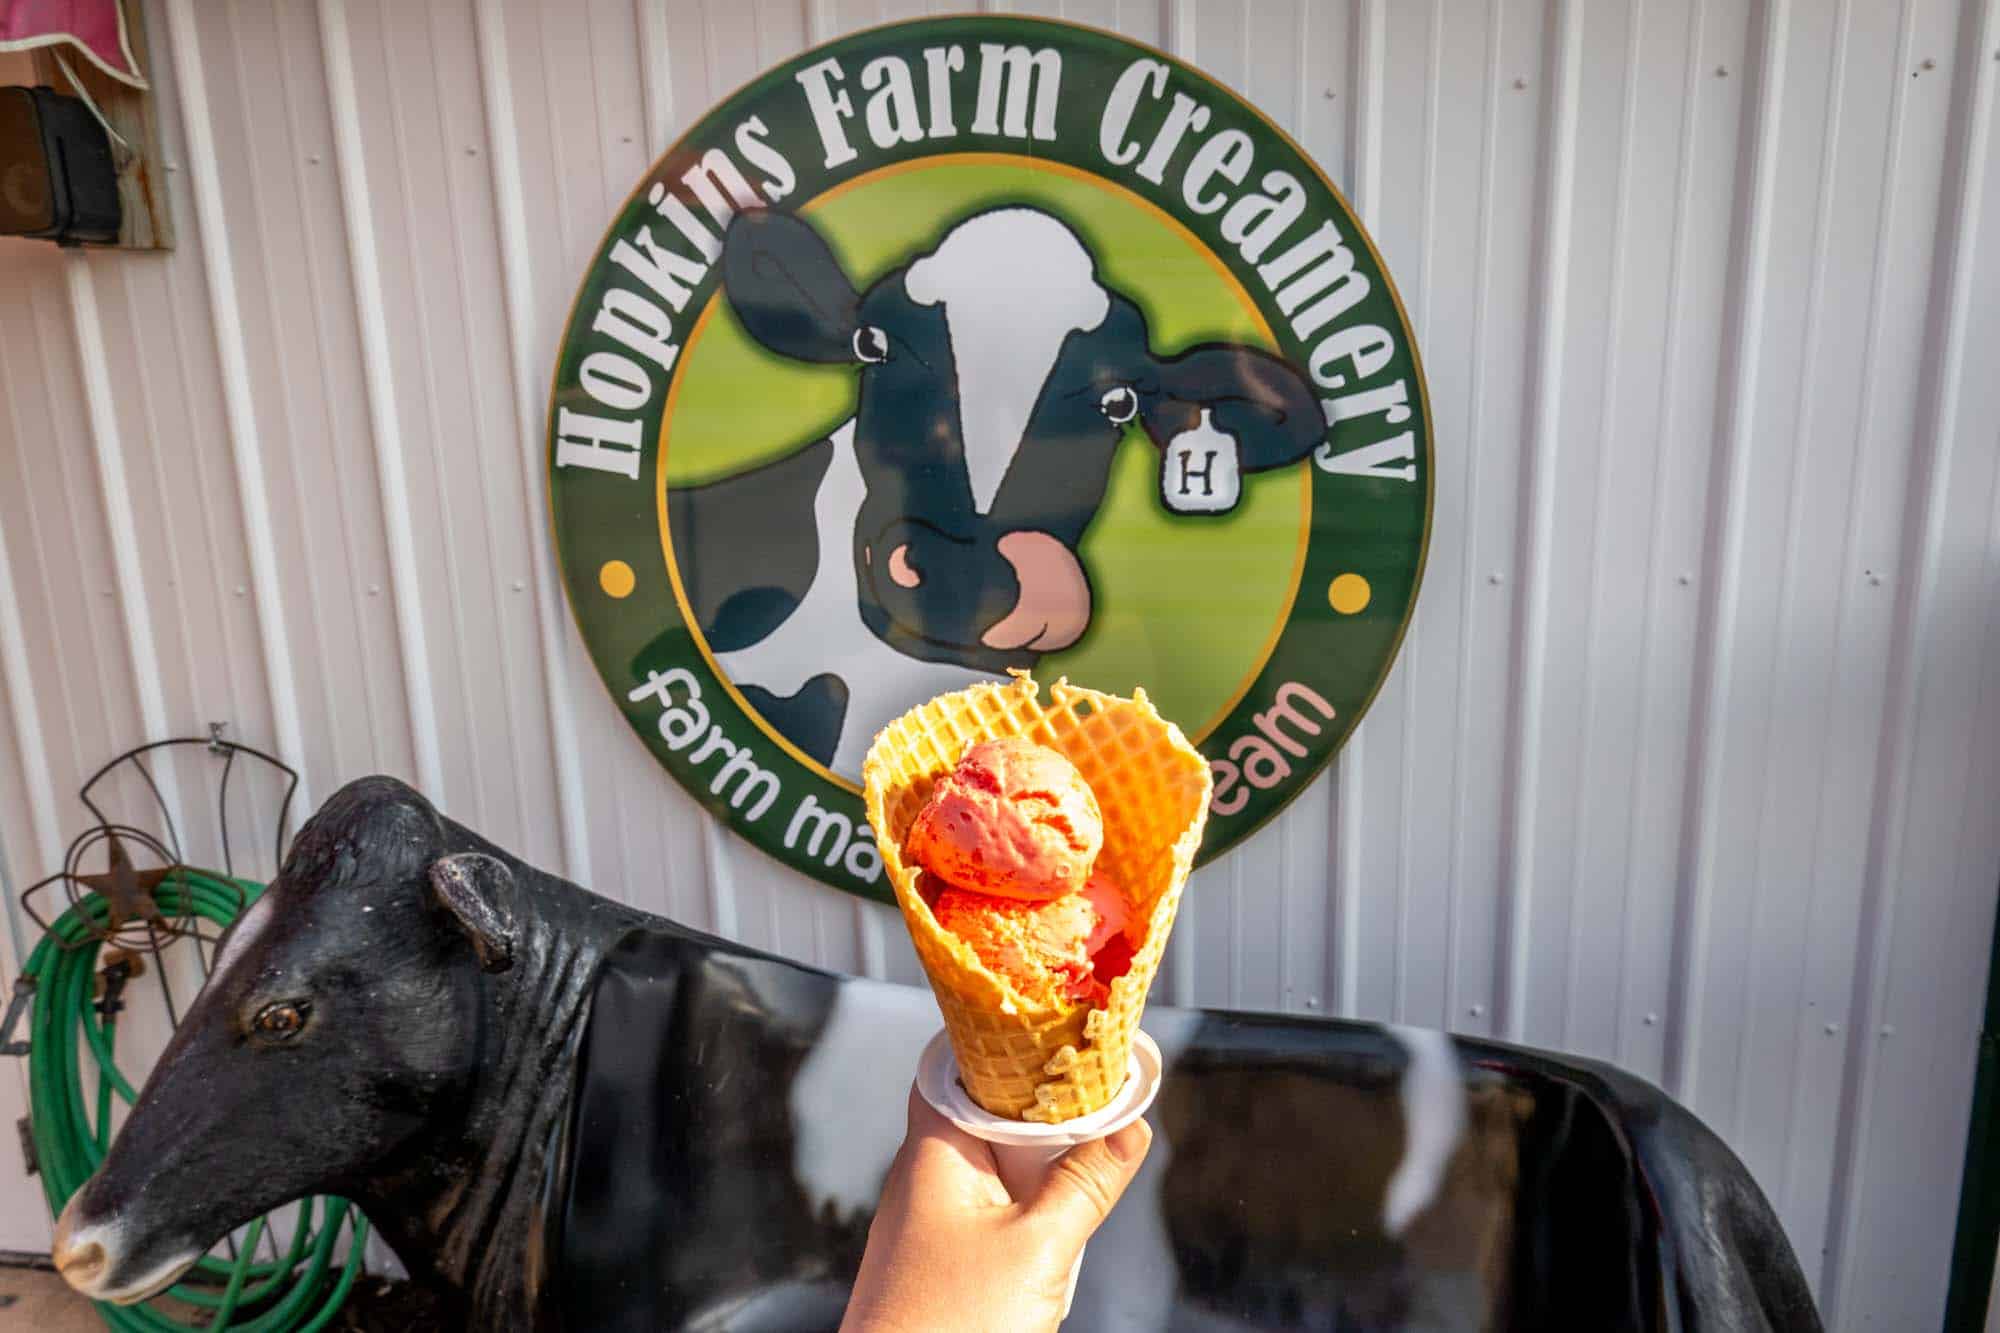 Ice cream cone in front of a sign for "Hopkins Farm Creamery"